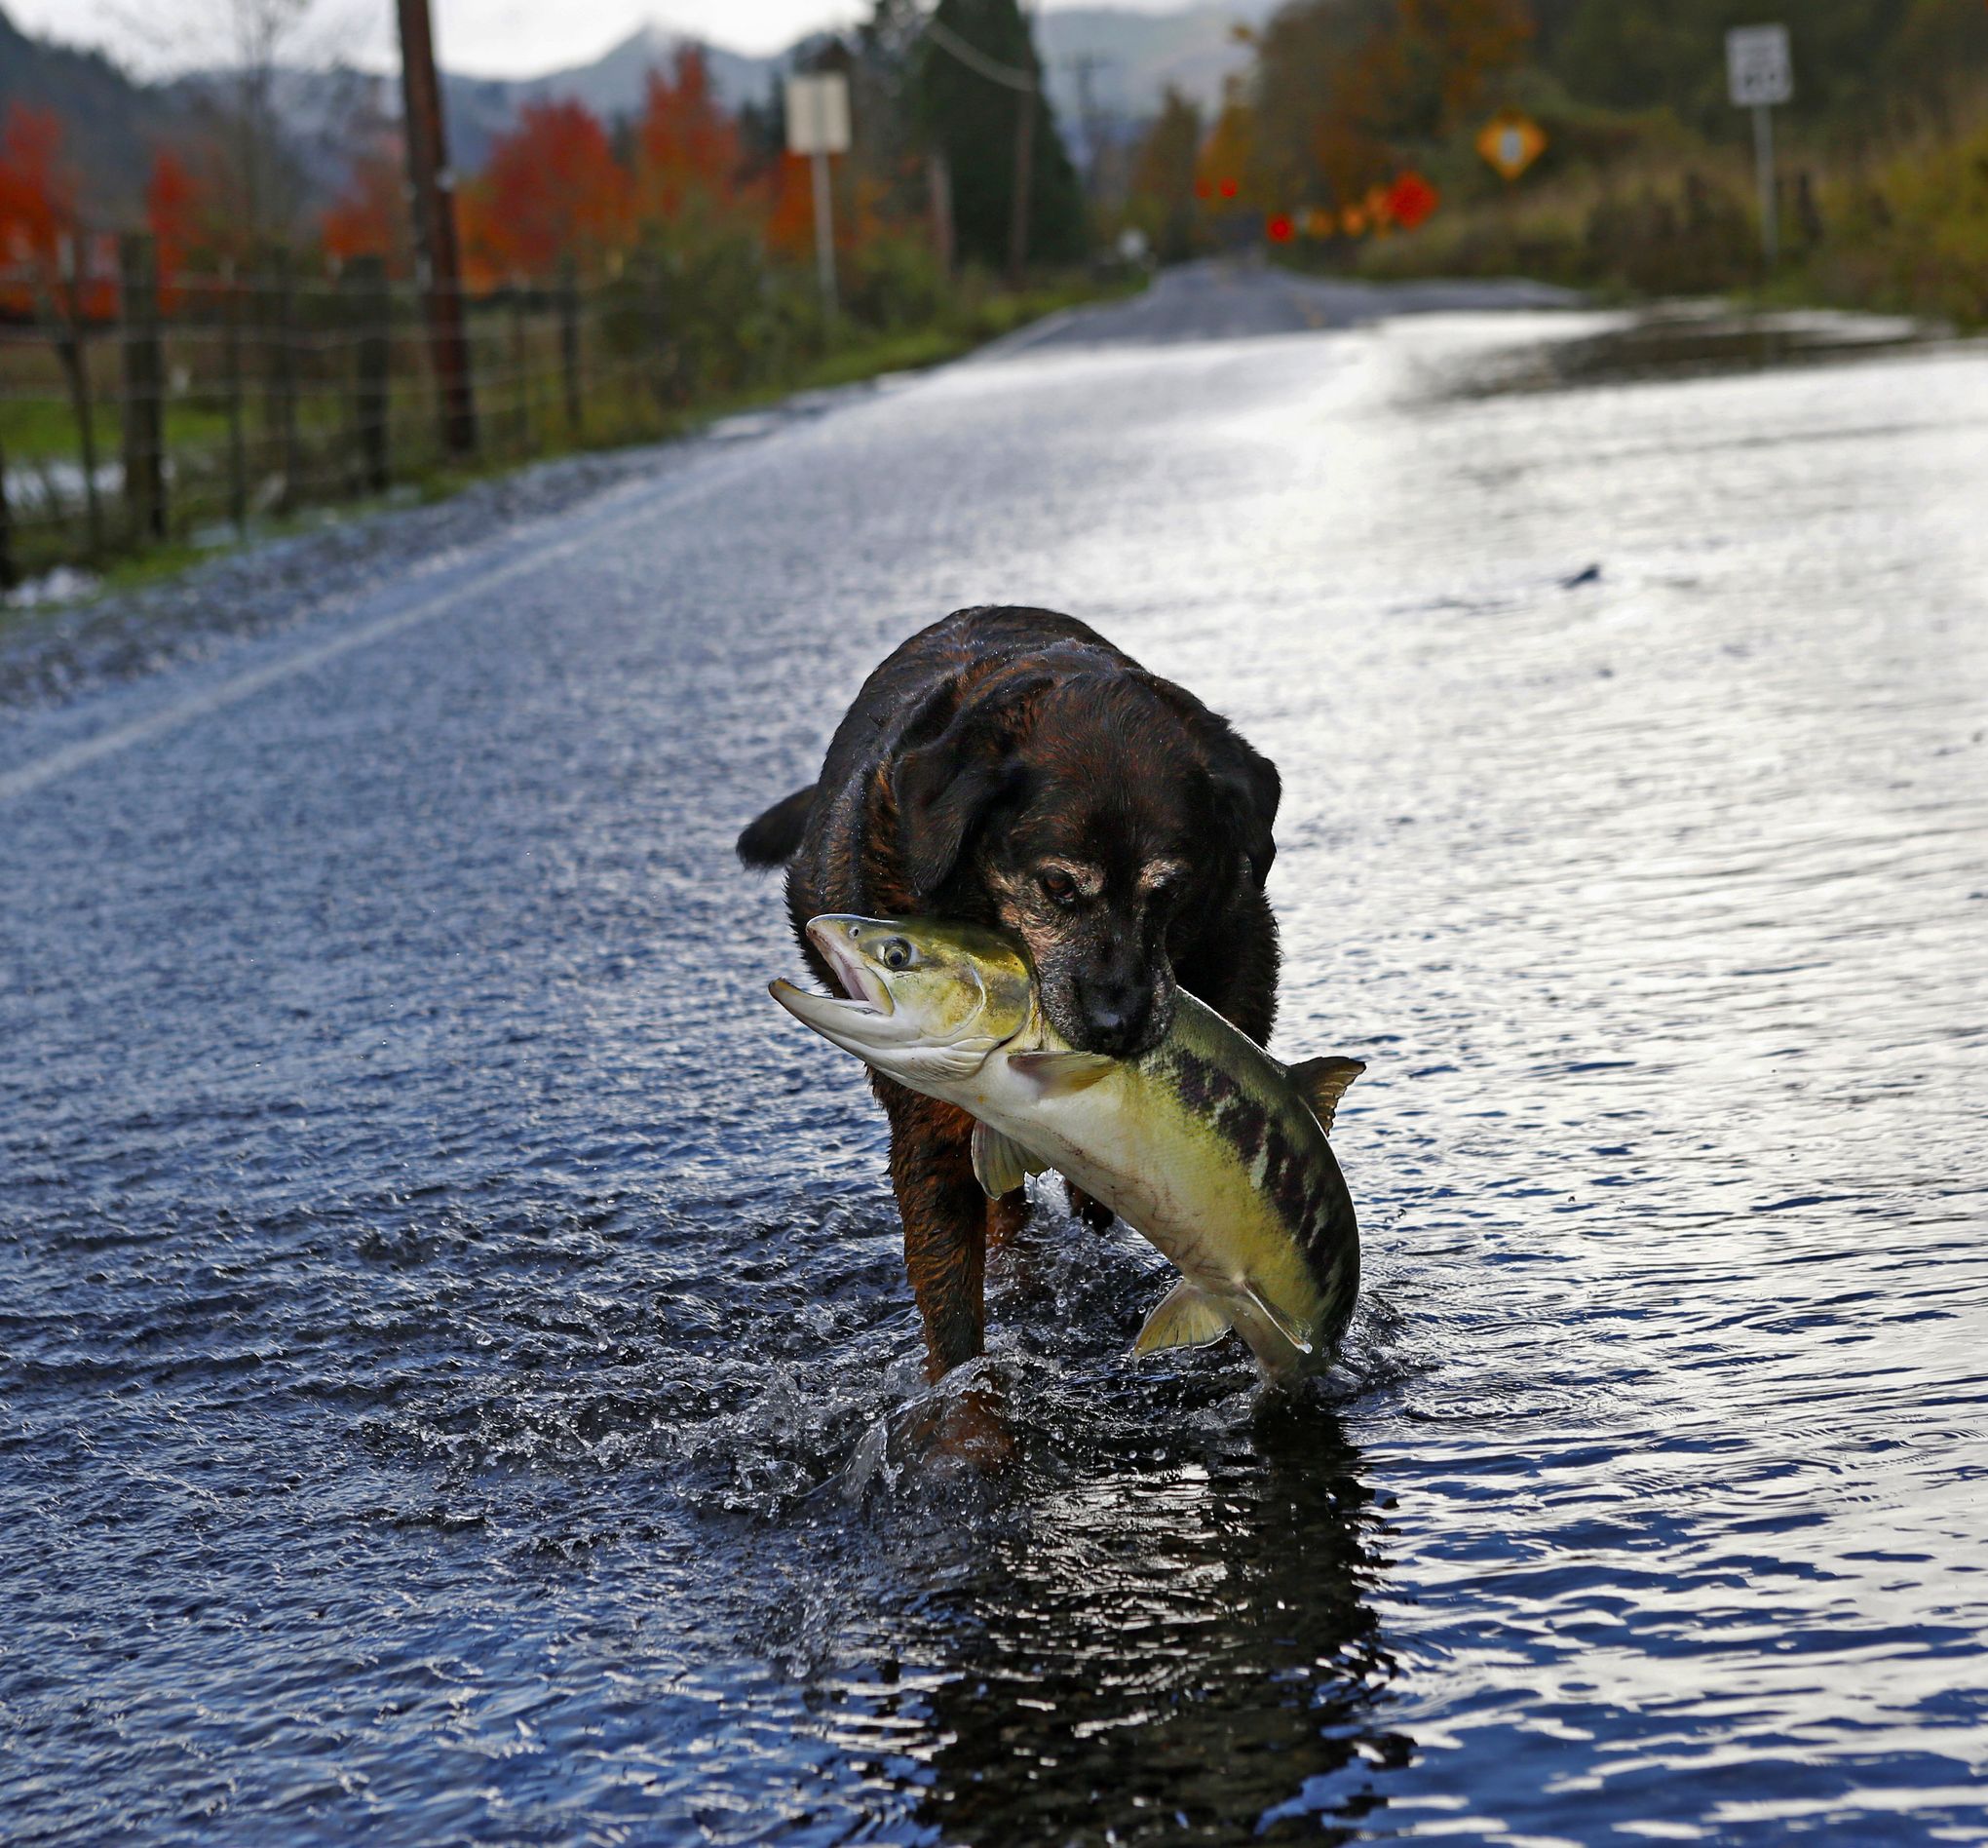 Let's hear it for chum: The underdog salmon has a serious drive to